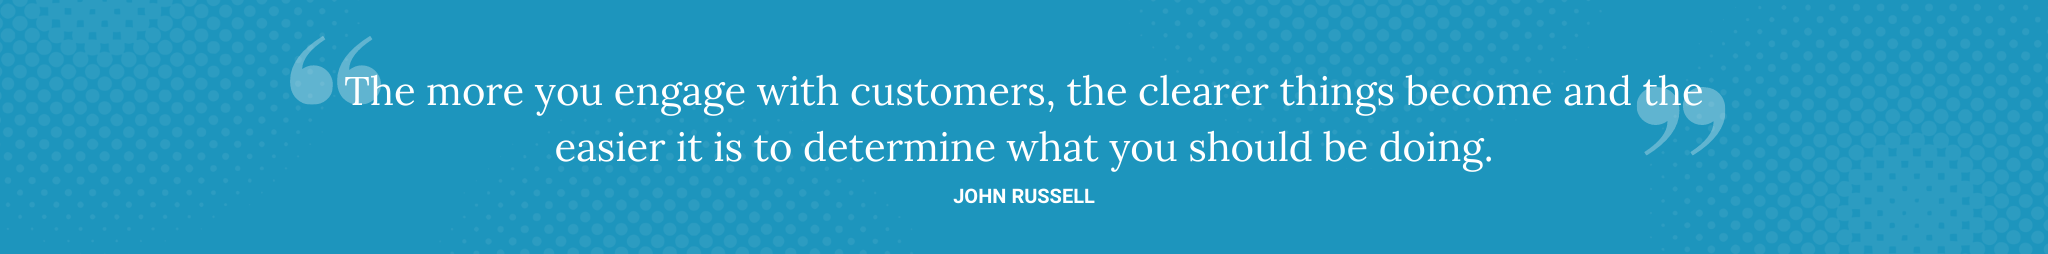 John Russell Quote for 50 Customer Service Stats Quotes and Facts - Brittany Hodak